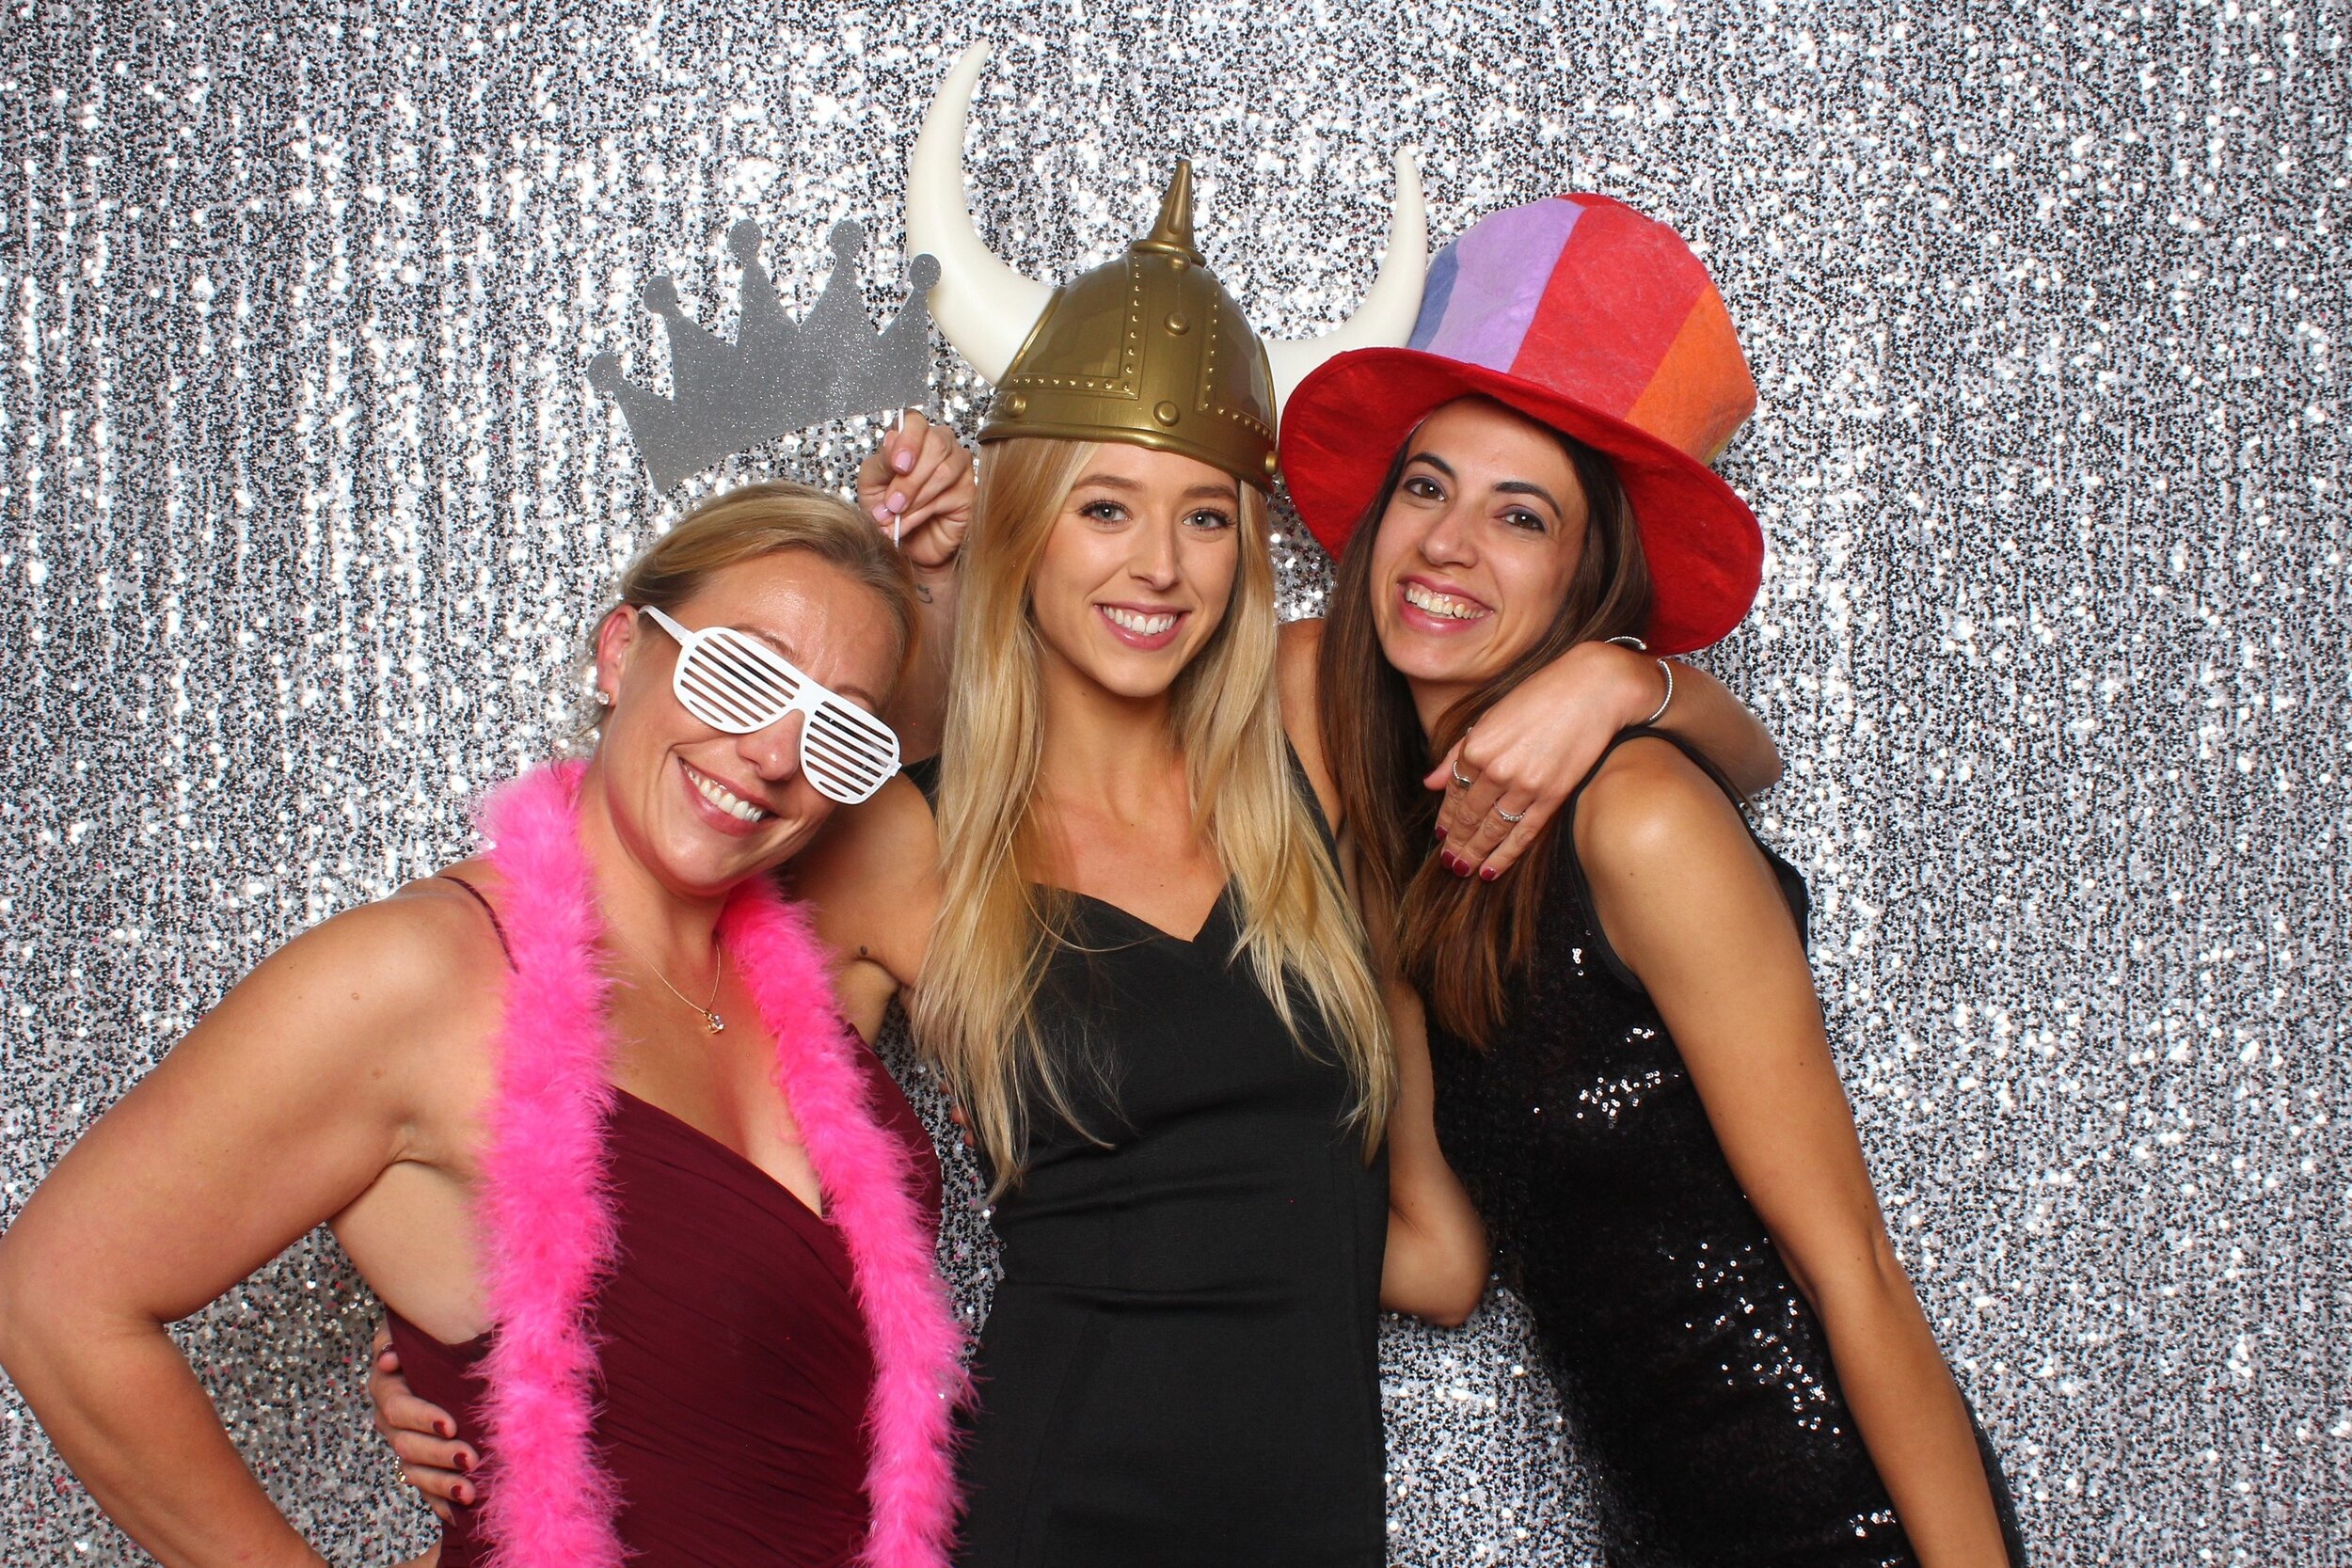  Three women in formal attire and silly props posing for a photo booth picture. 